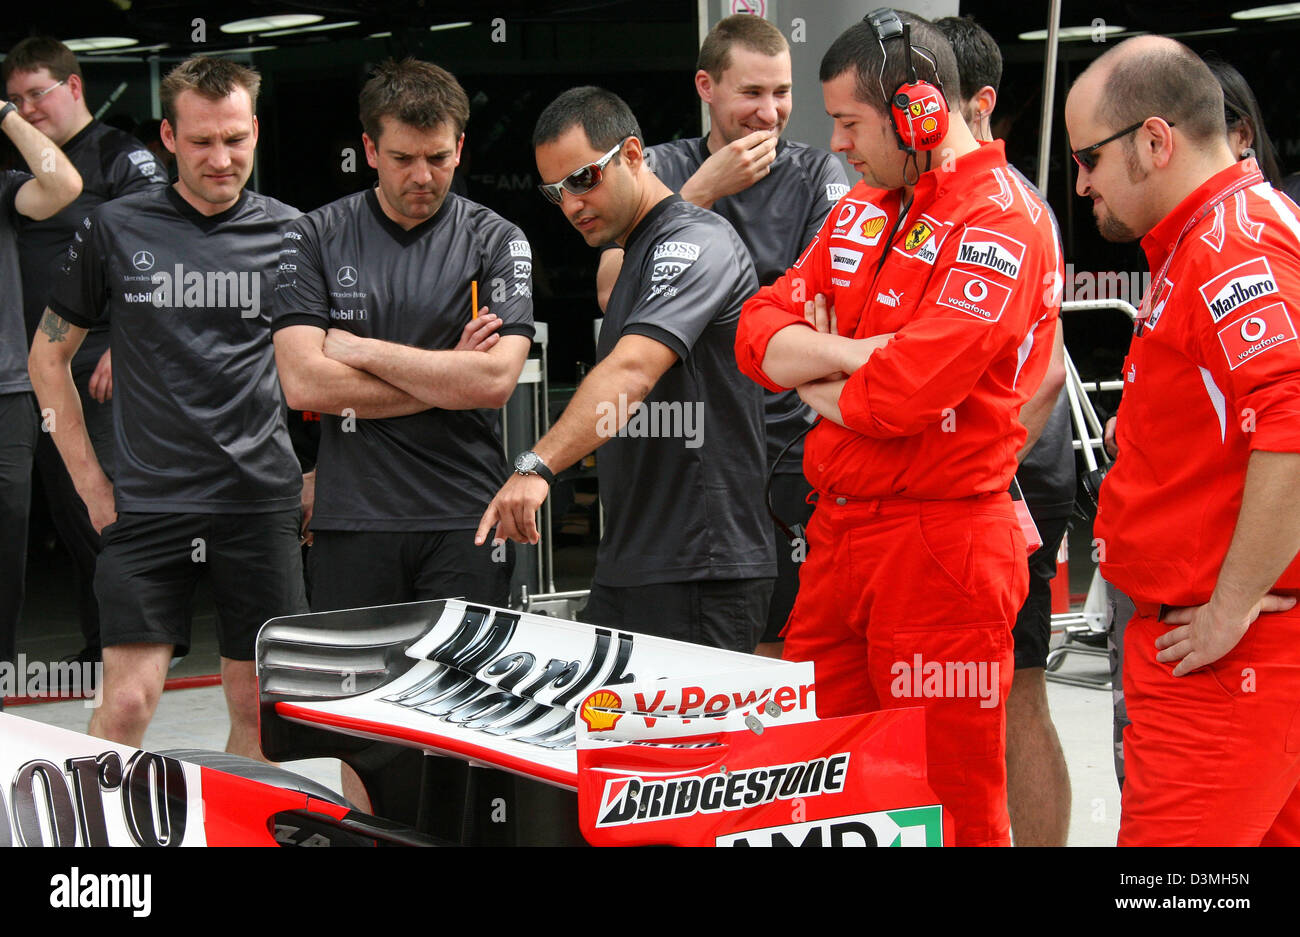 Colombian Formula One Driver Juan Pablo Montoya (C, with sun glasses) of Mercedes-McLaren F1 team examines the Ferrari of Michael Schumacher during the first practice session at the racetrack in Sepang near Kuala Lumpur, Malaysia, Friday 17 March 2006. The Grand Prix of Malaysia takes place on Sunday 19 March 2006. Photo: Jens Buettner Stock Photo